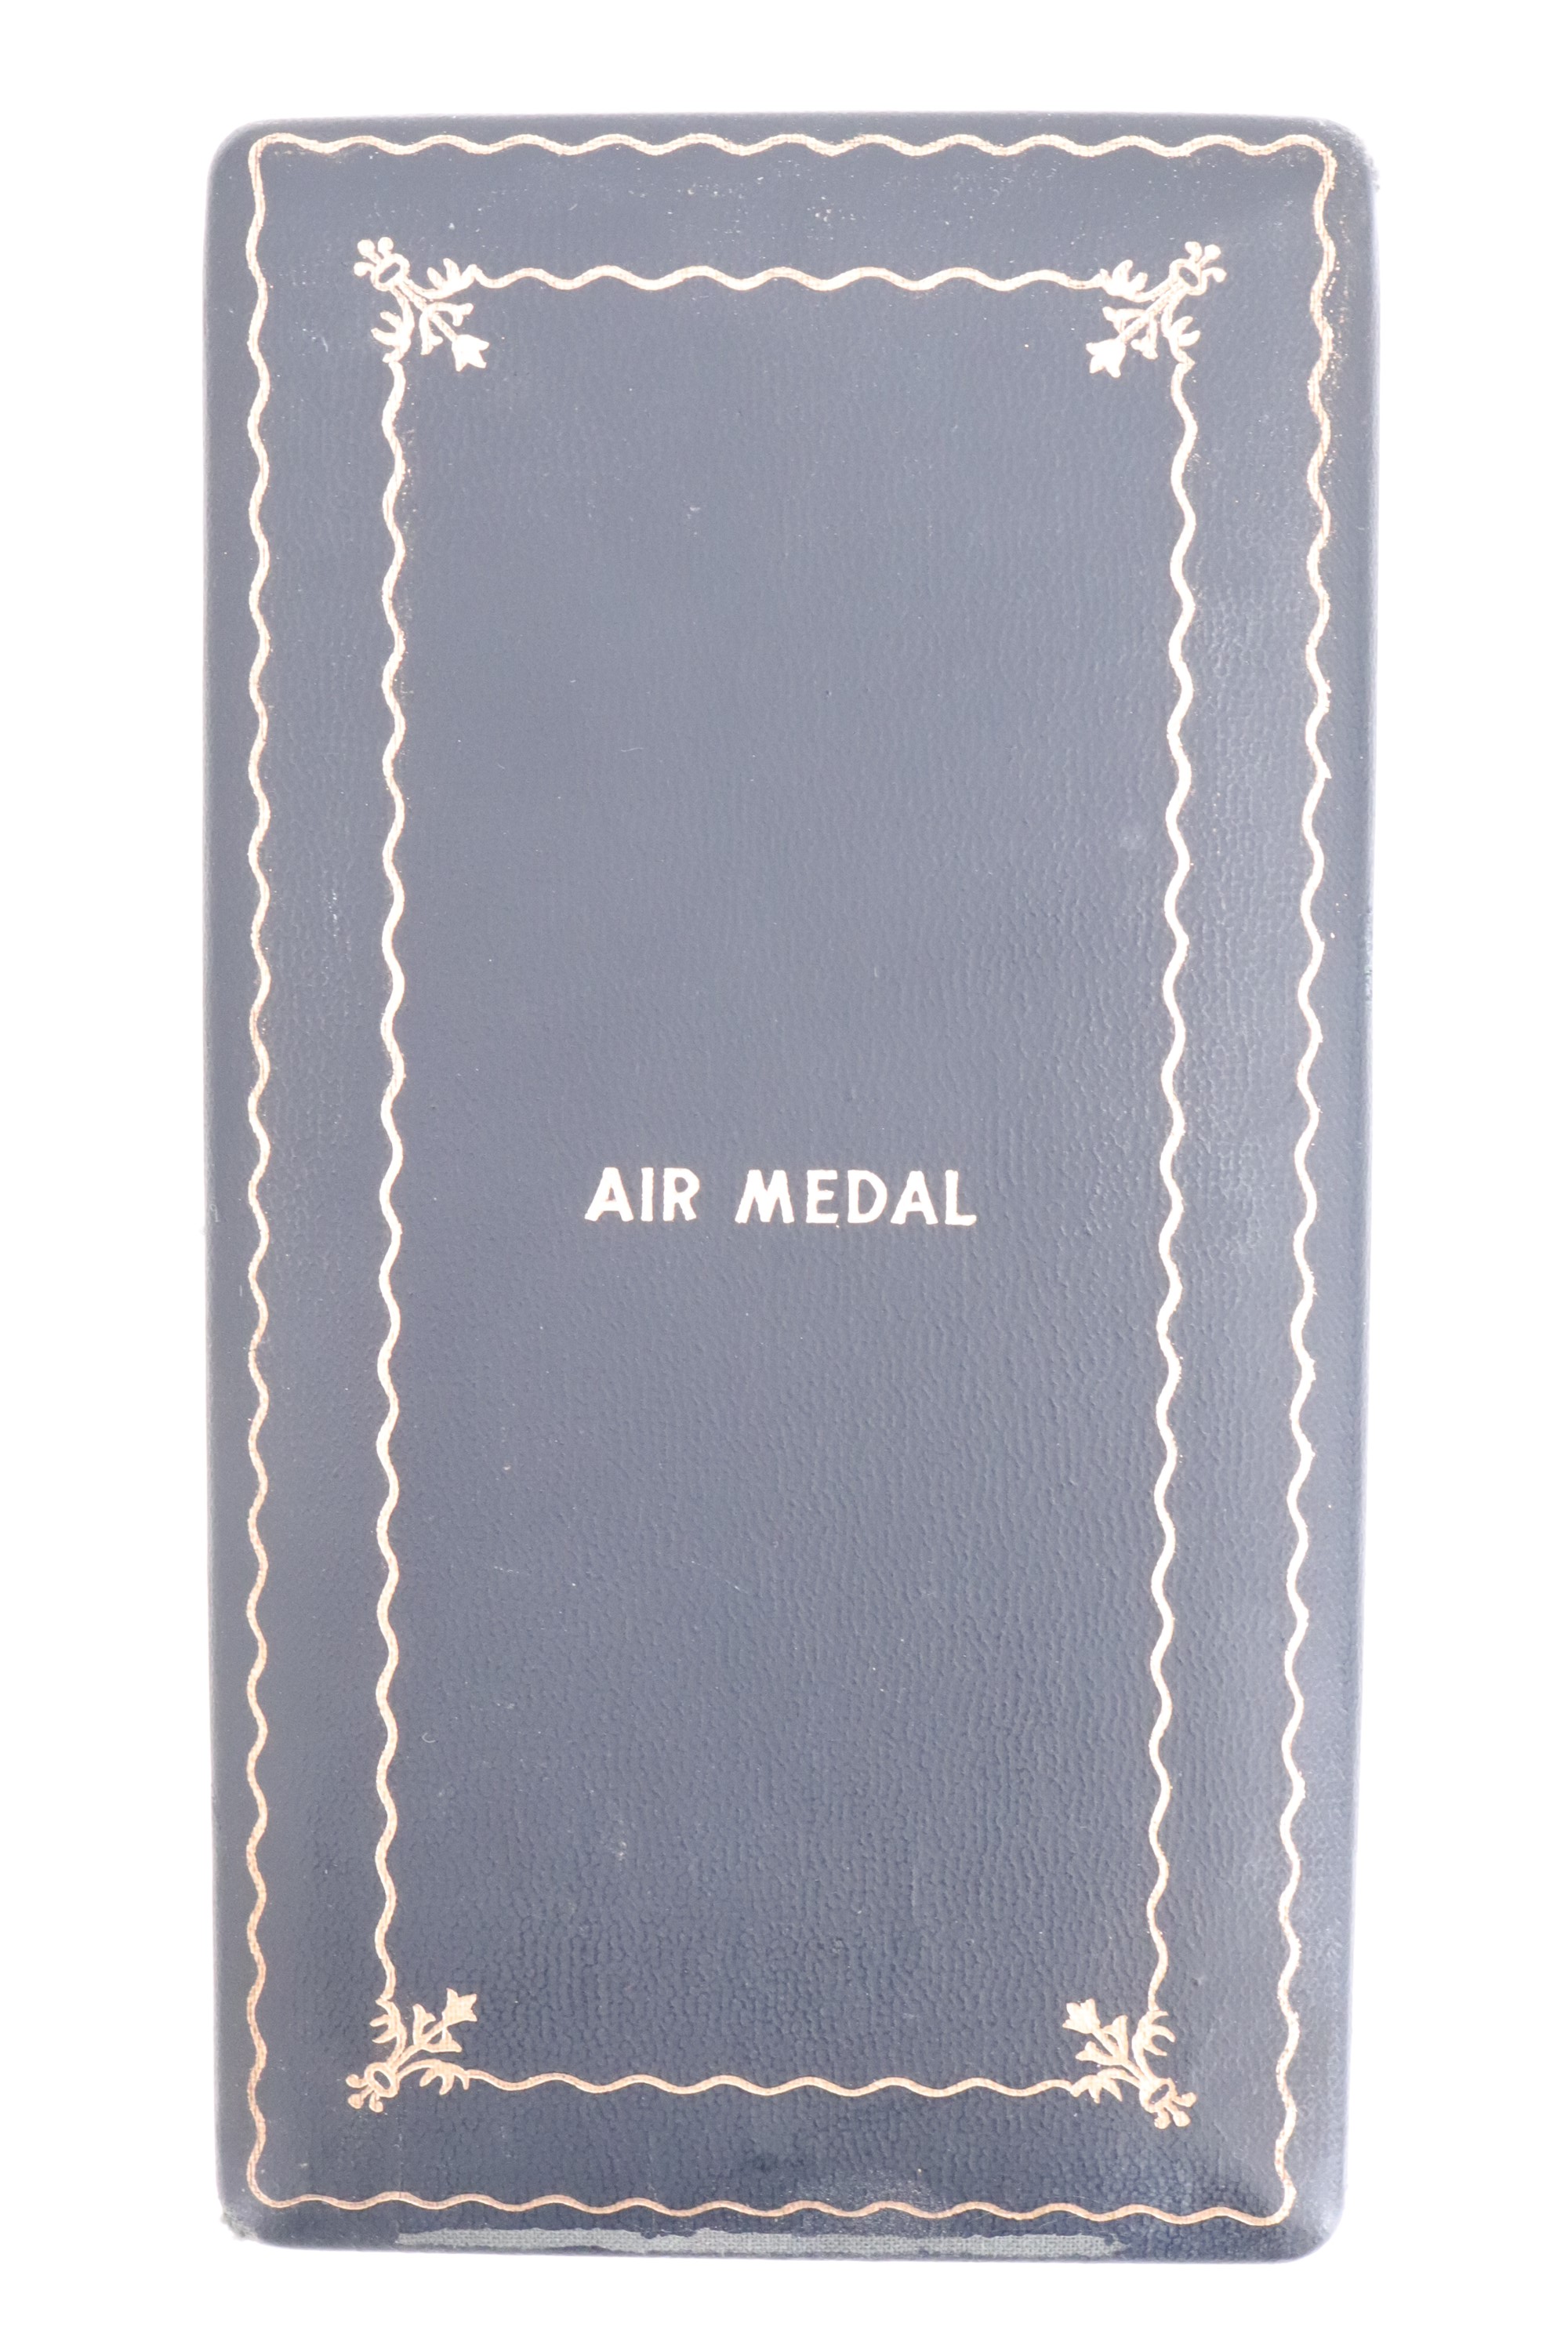 A US Air Medal, cased - Image 4 of 4